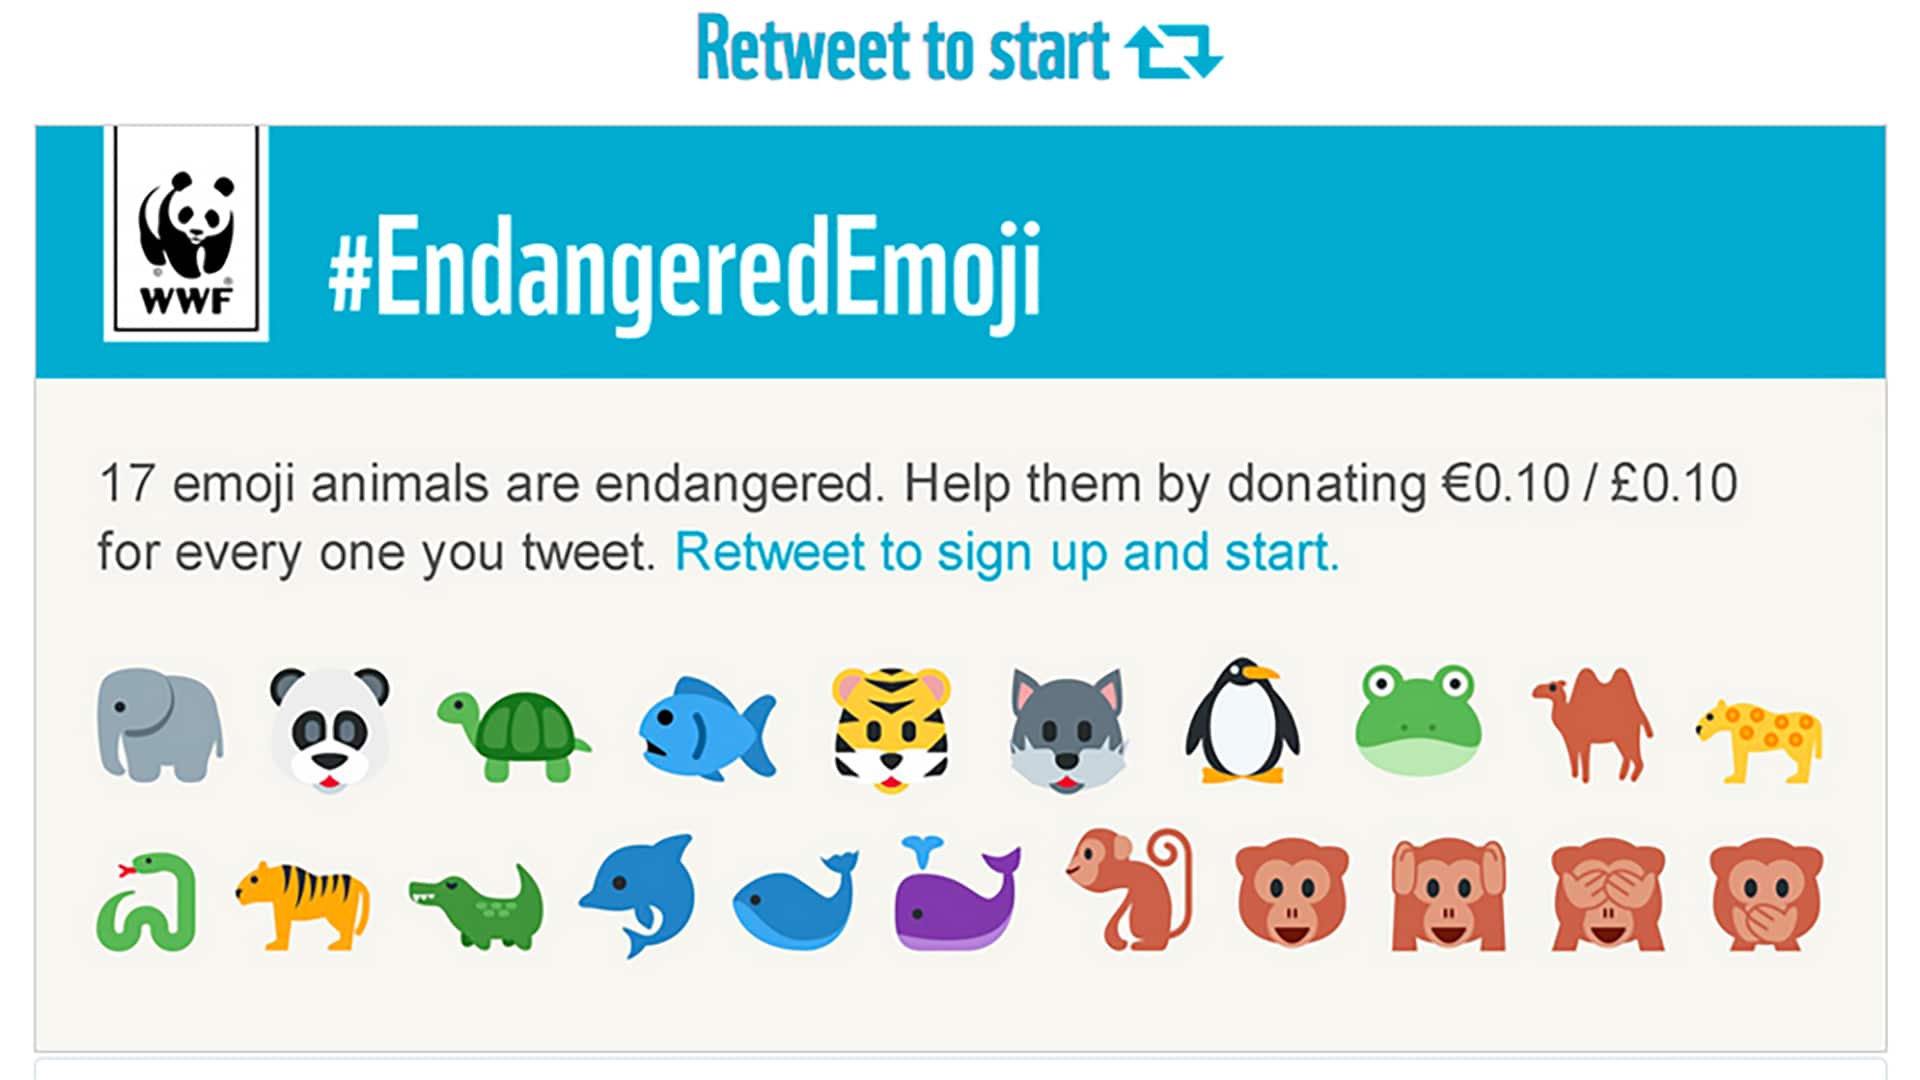 Global Twitter campaign for WWF and Endangered animals - Cohaesus